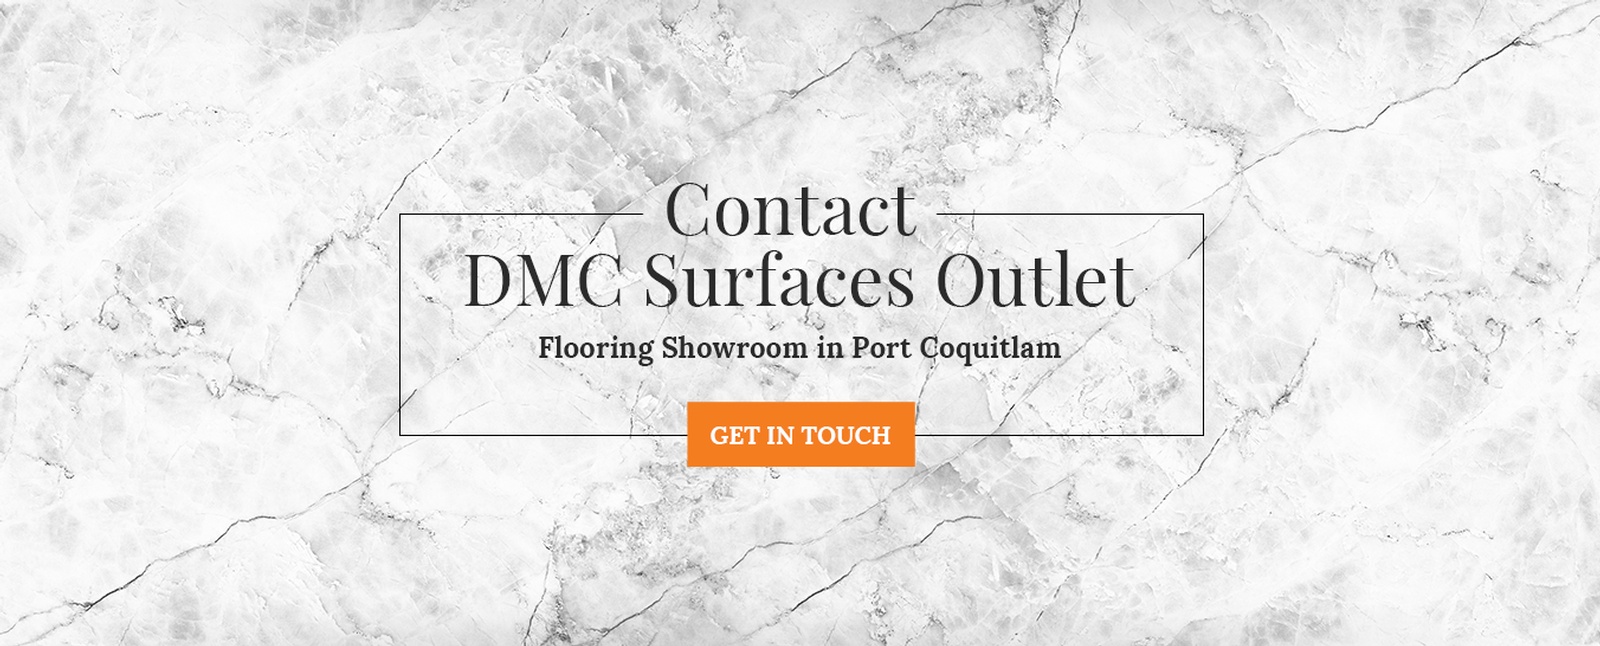 DMC Surfaces Outlet - Flooring Showroom in Port Coquitlam